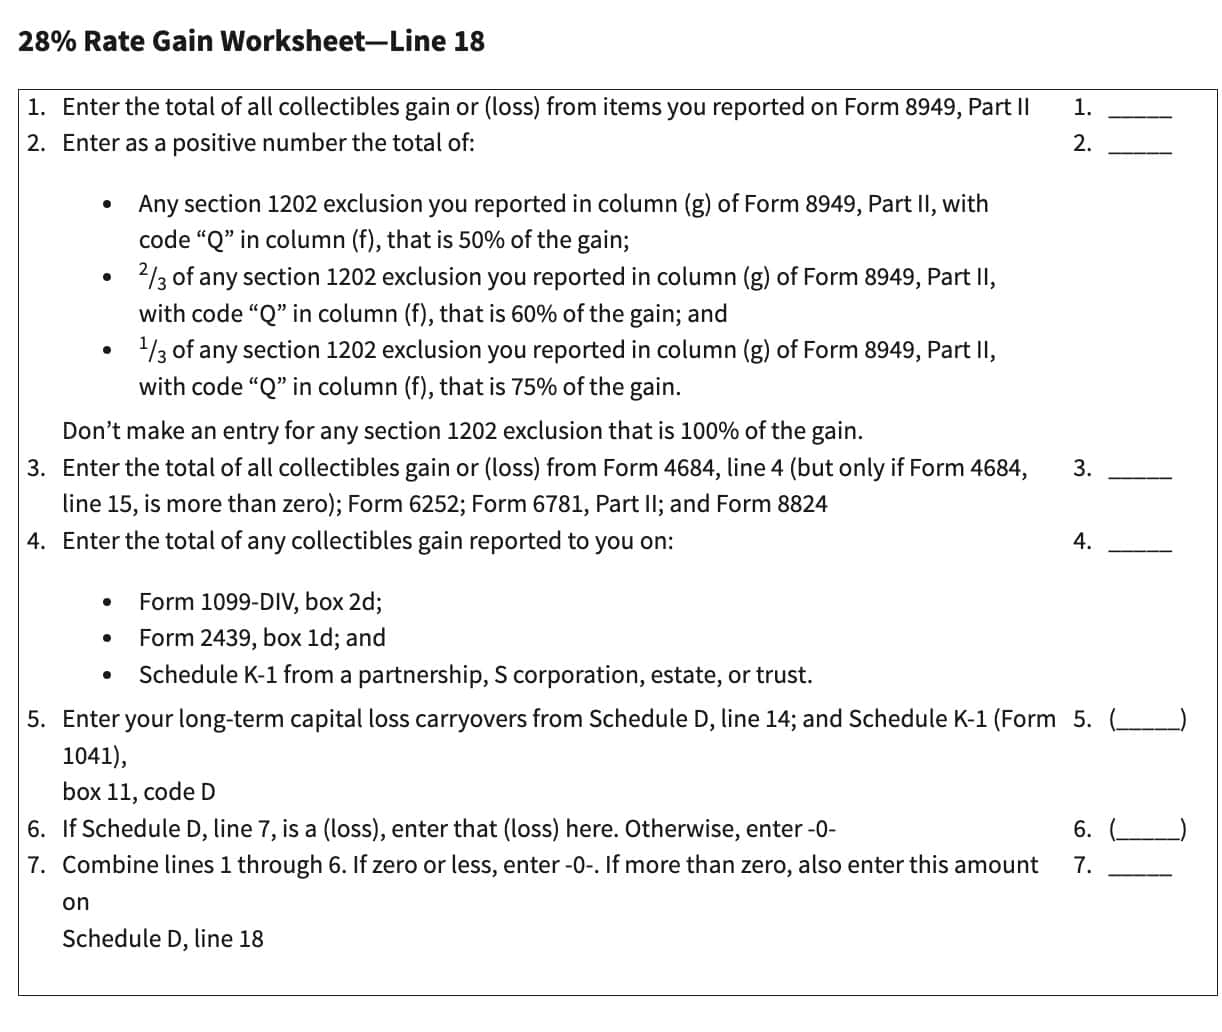 28% rate gain worksheet for Line 18 calculations